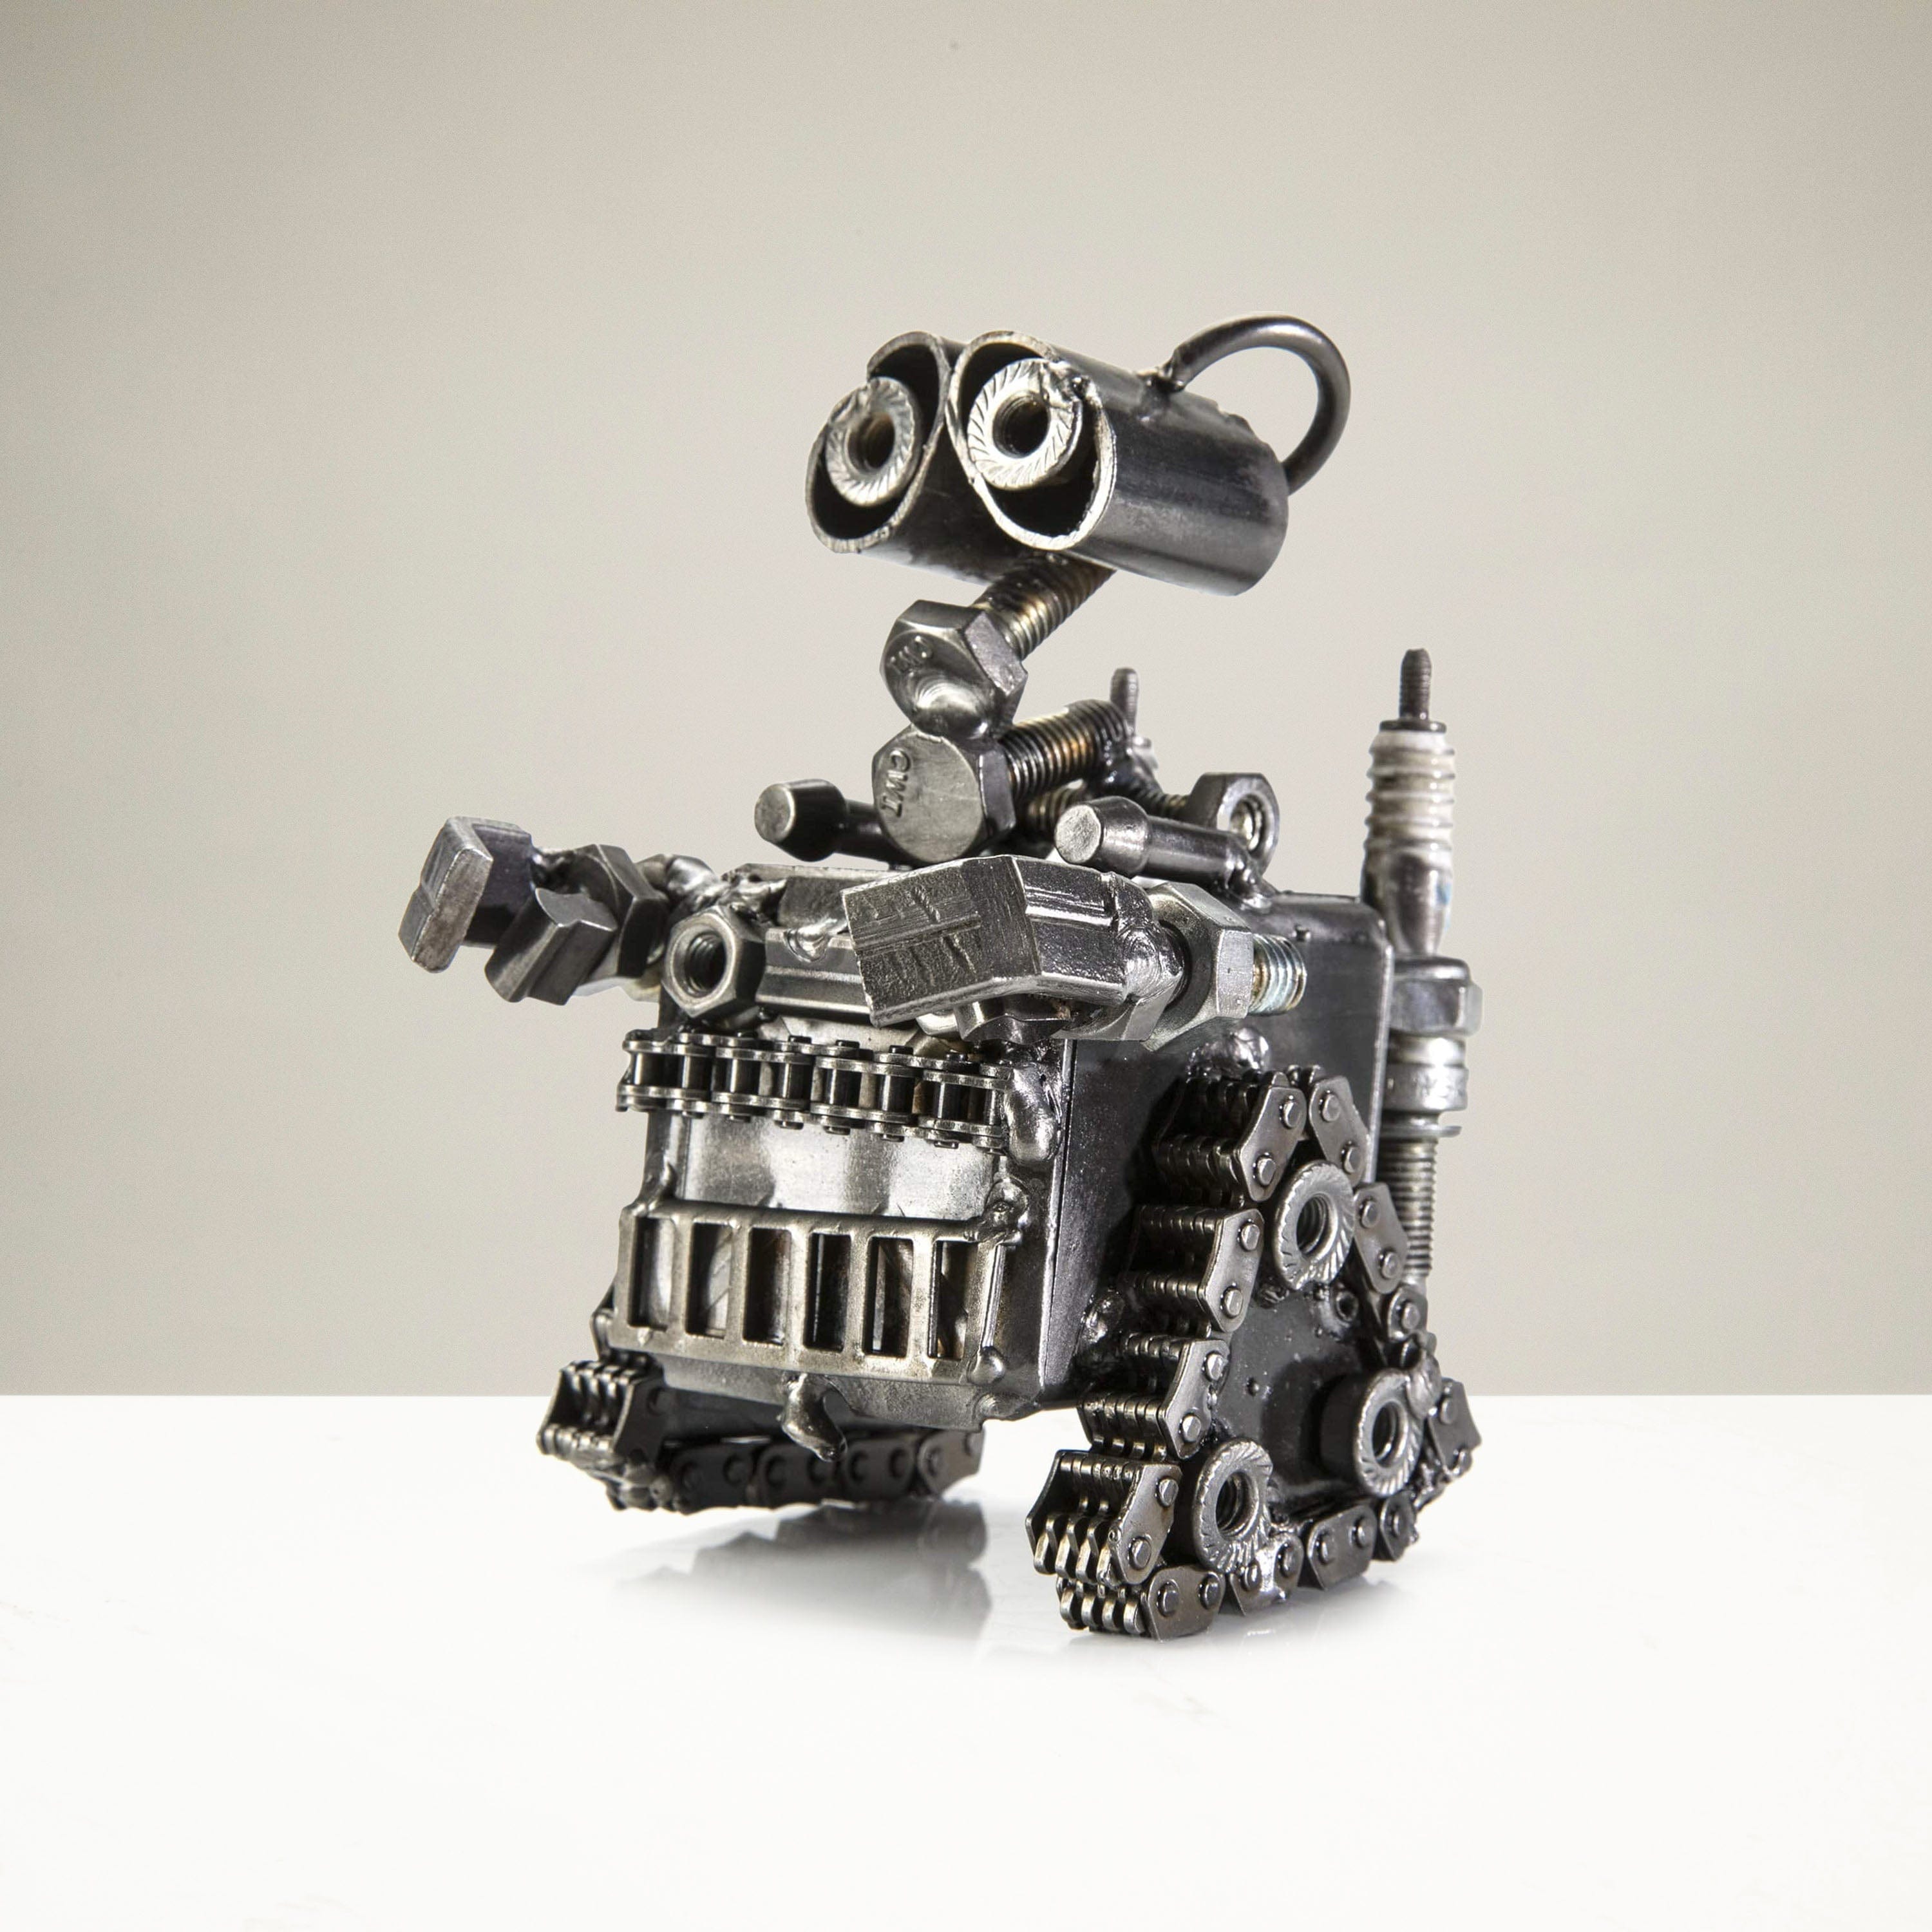 Kalifano Recycled Metal Art Wall-E Inspired Recycled Metal Sculpture RMS-280WE-S